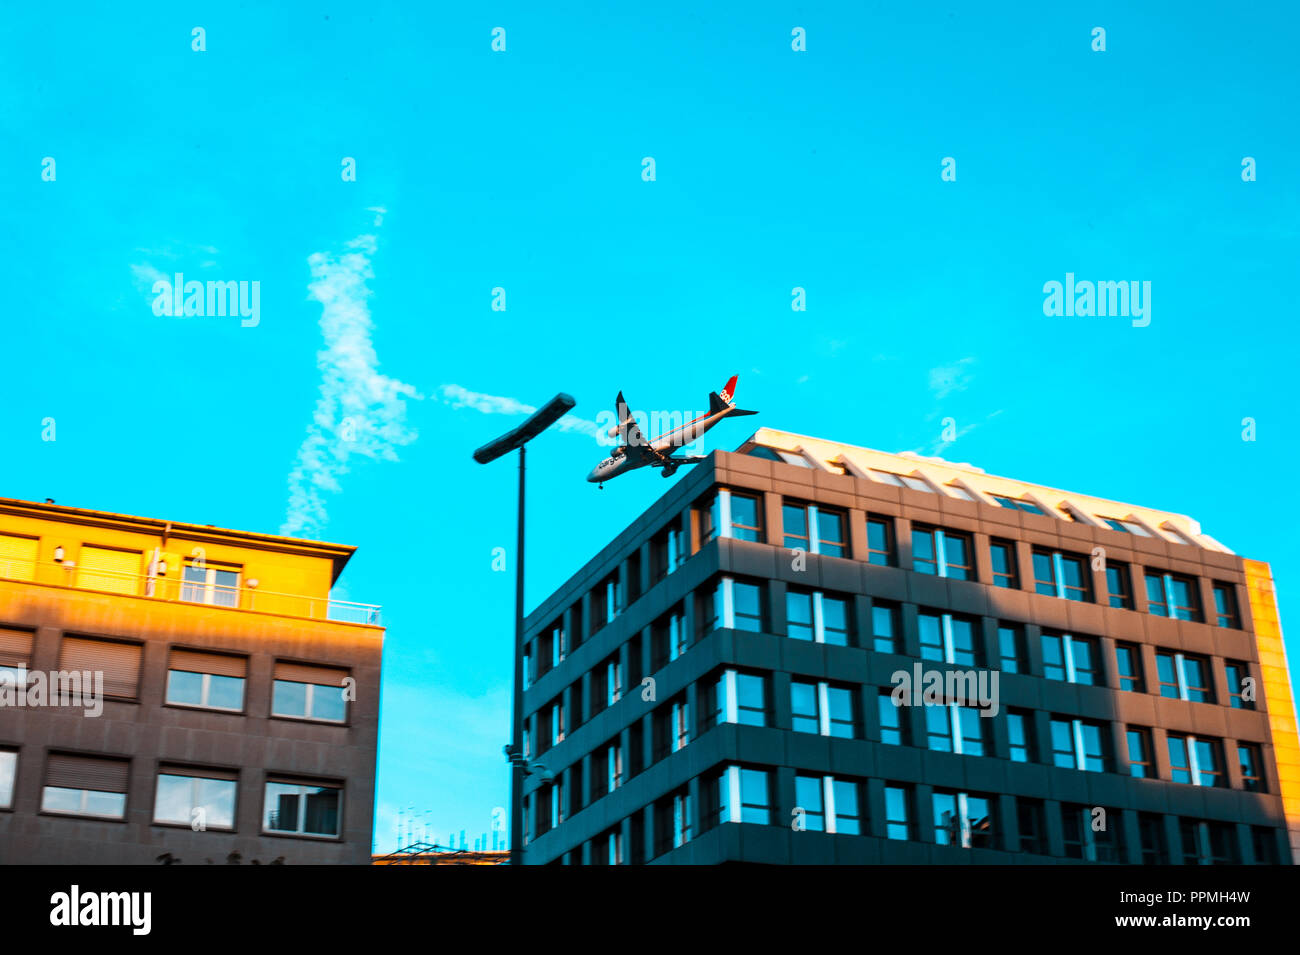 Airplane passing through buildings, Luxembourg Stock Photo